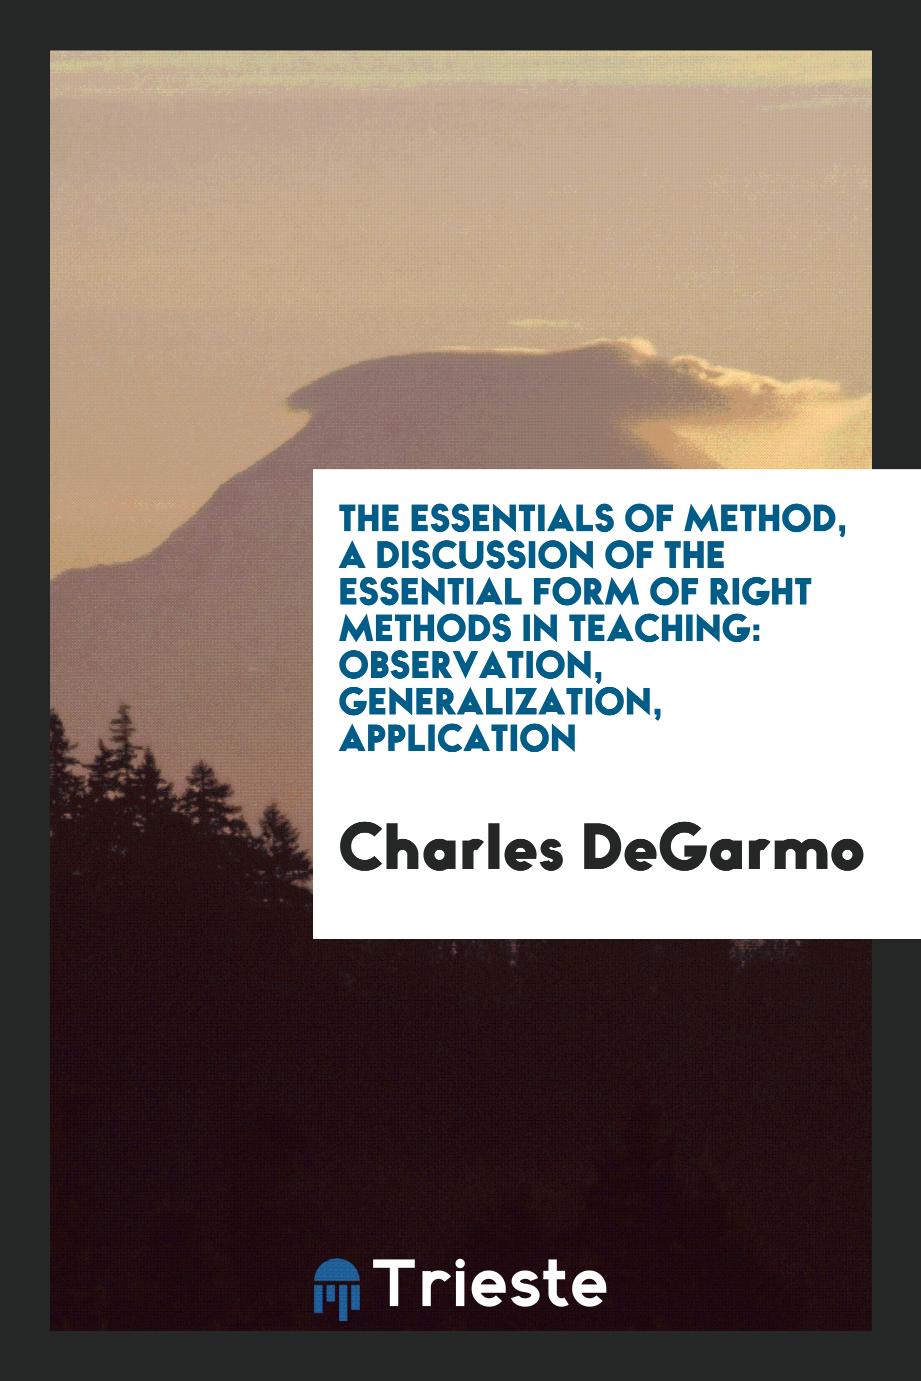 The Essentials of Method, a Discussion of the Essential Form of Right Methods in Teaching: Observation, Generalization, Application